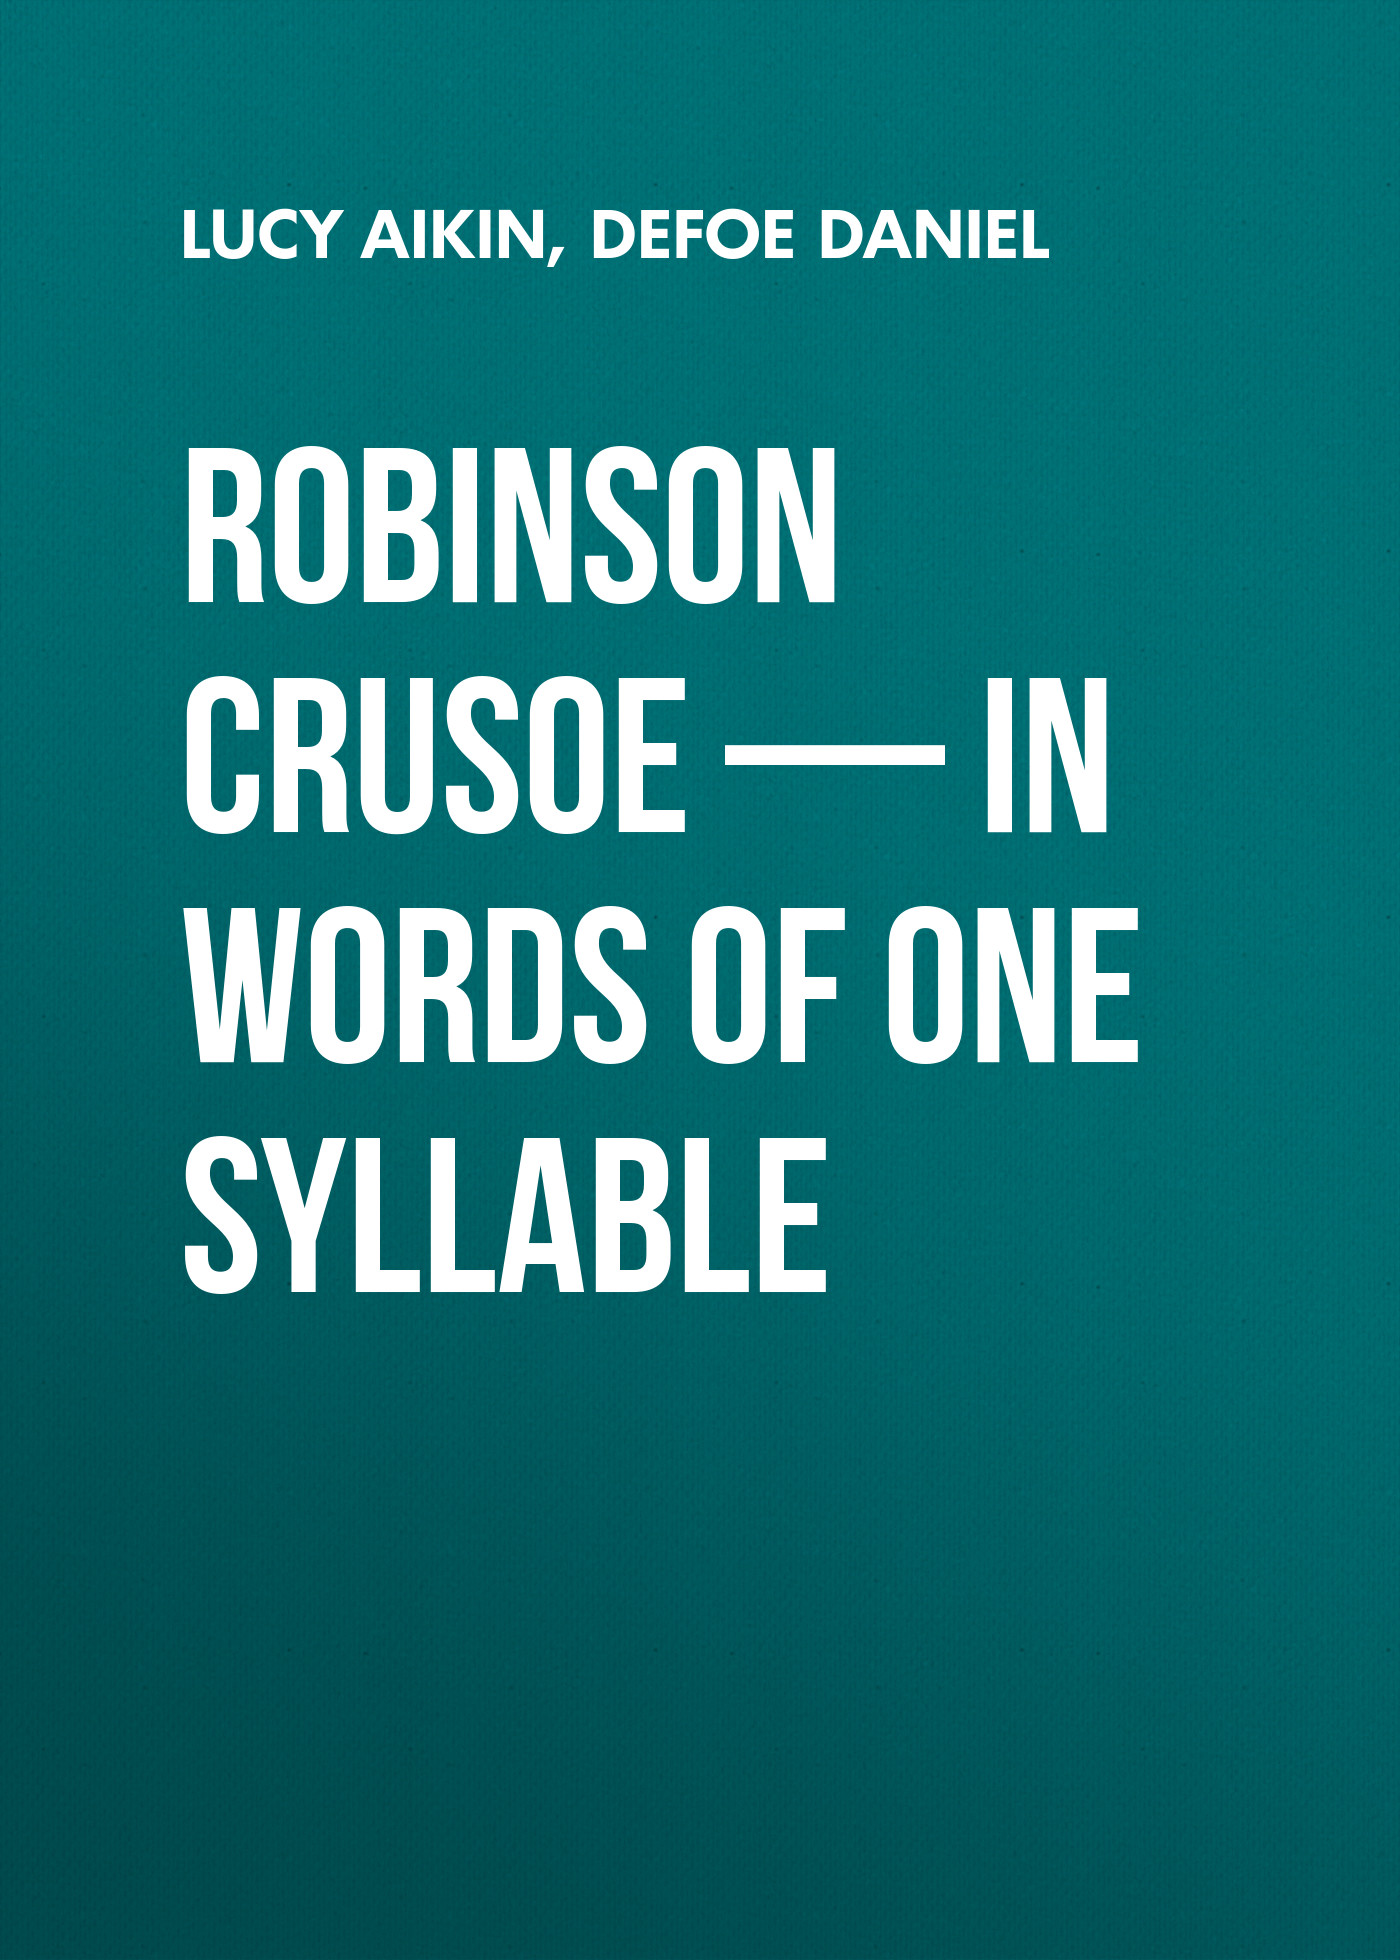 Robinson Crusoe— in Words of One Syllable